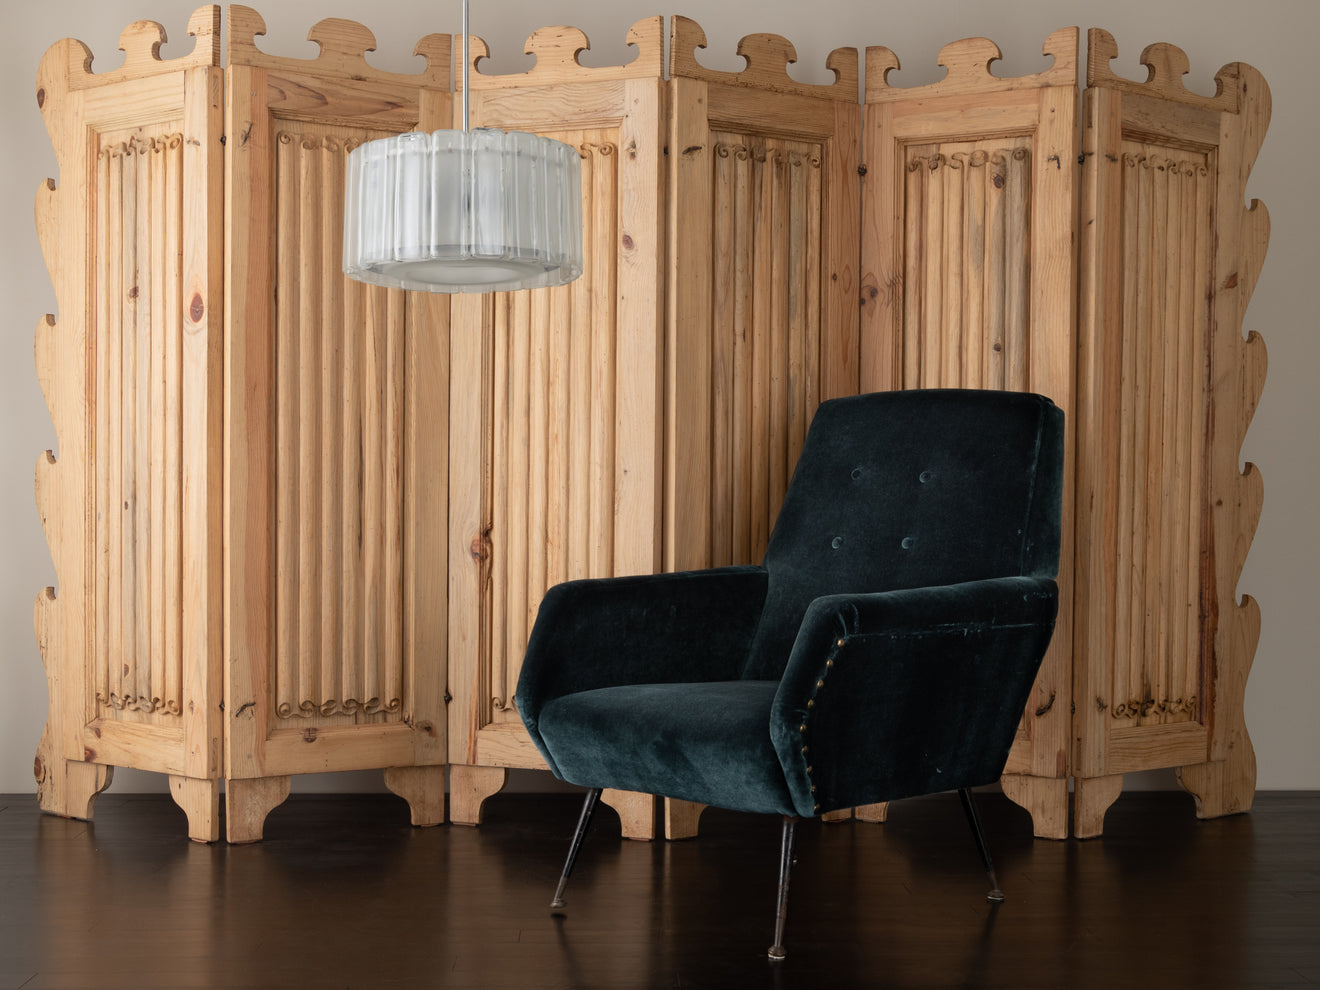 6 PANEL POMBAL LINEN FOLDING SCREEN BY MIKE DIAZ